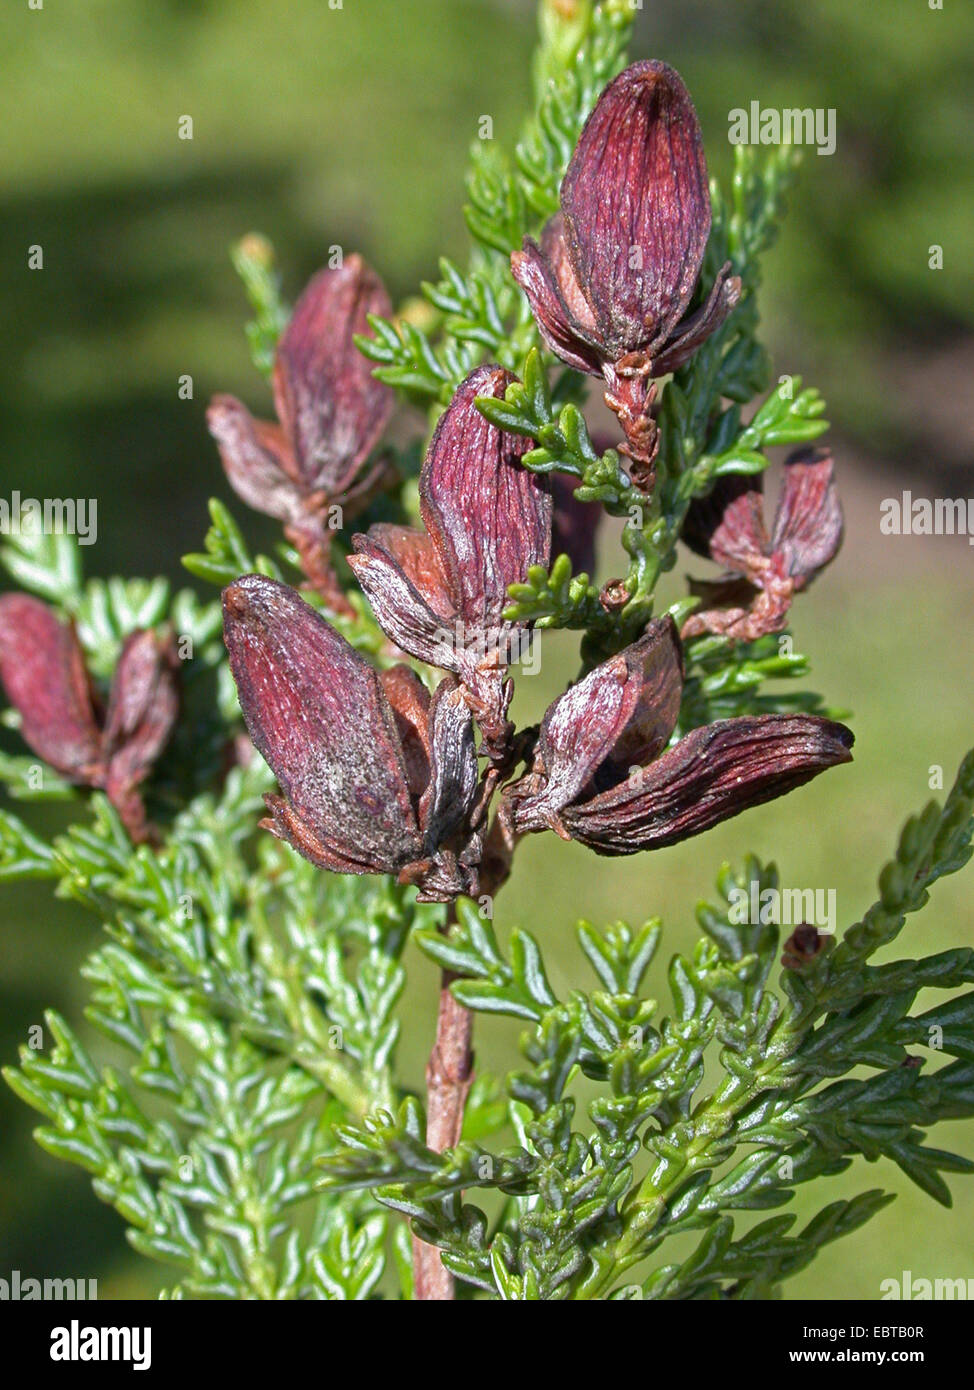 Patagonian Cypress (Austrocedrus chilensis), branch with cones Stock Photo